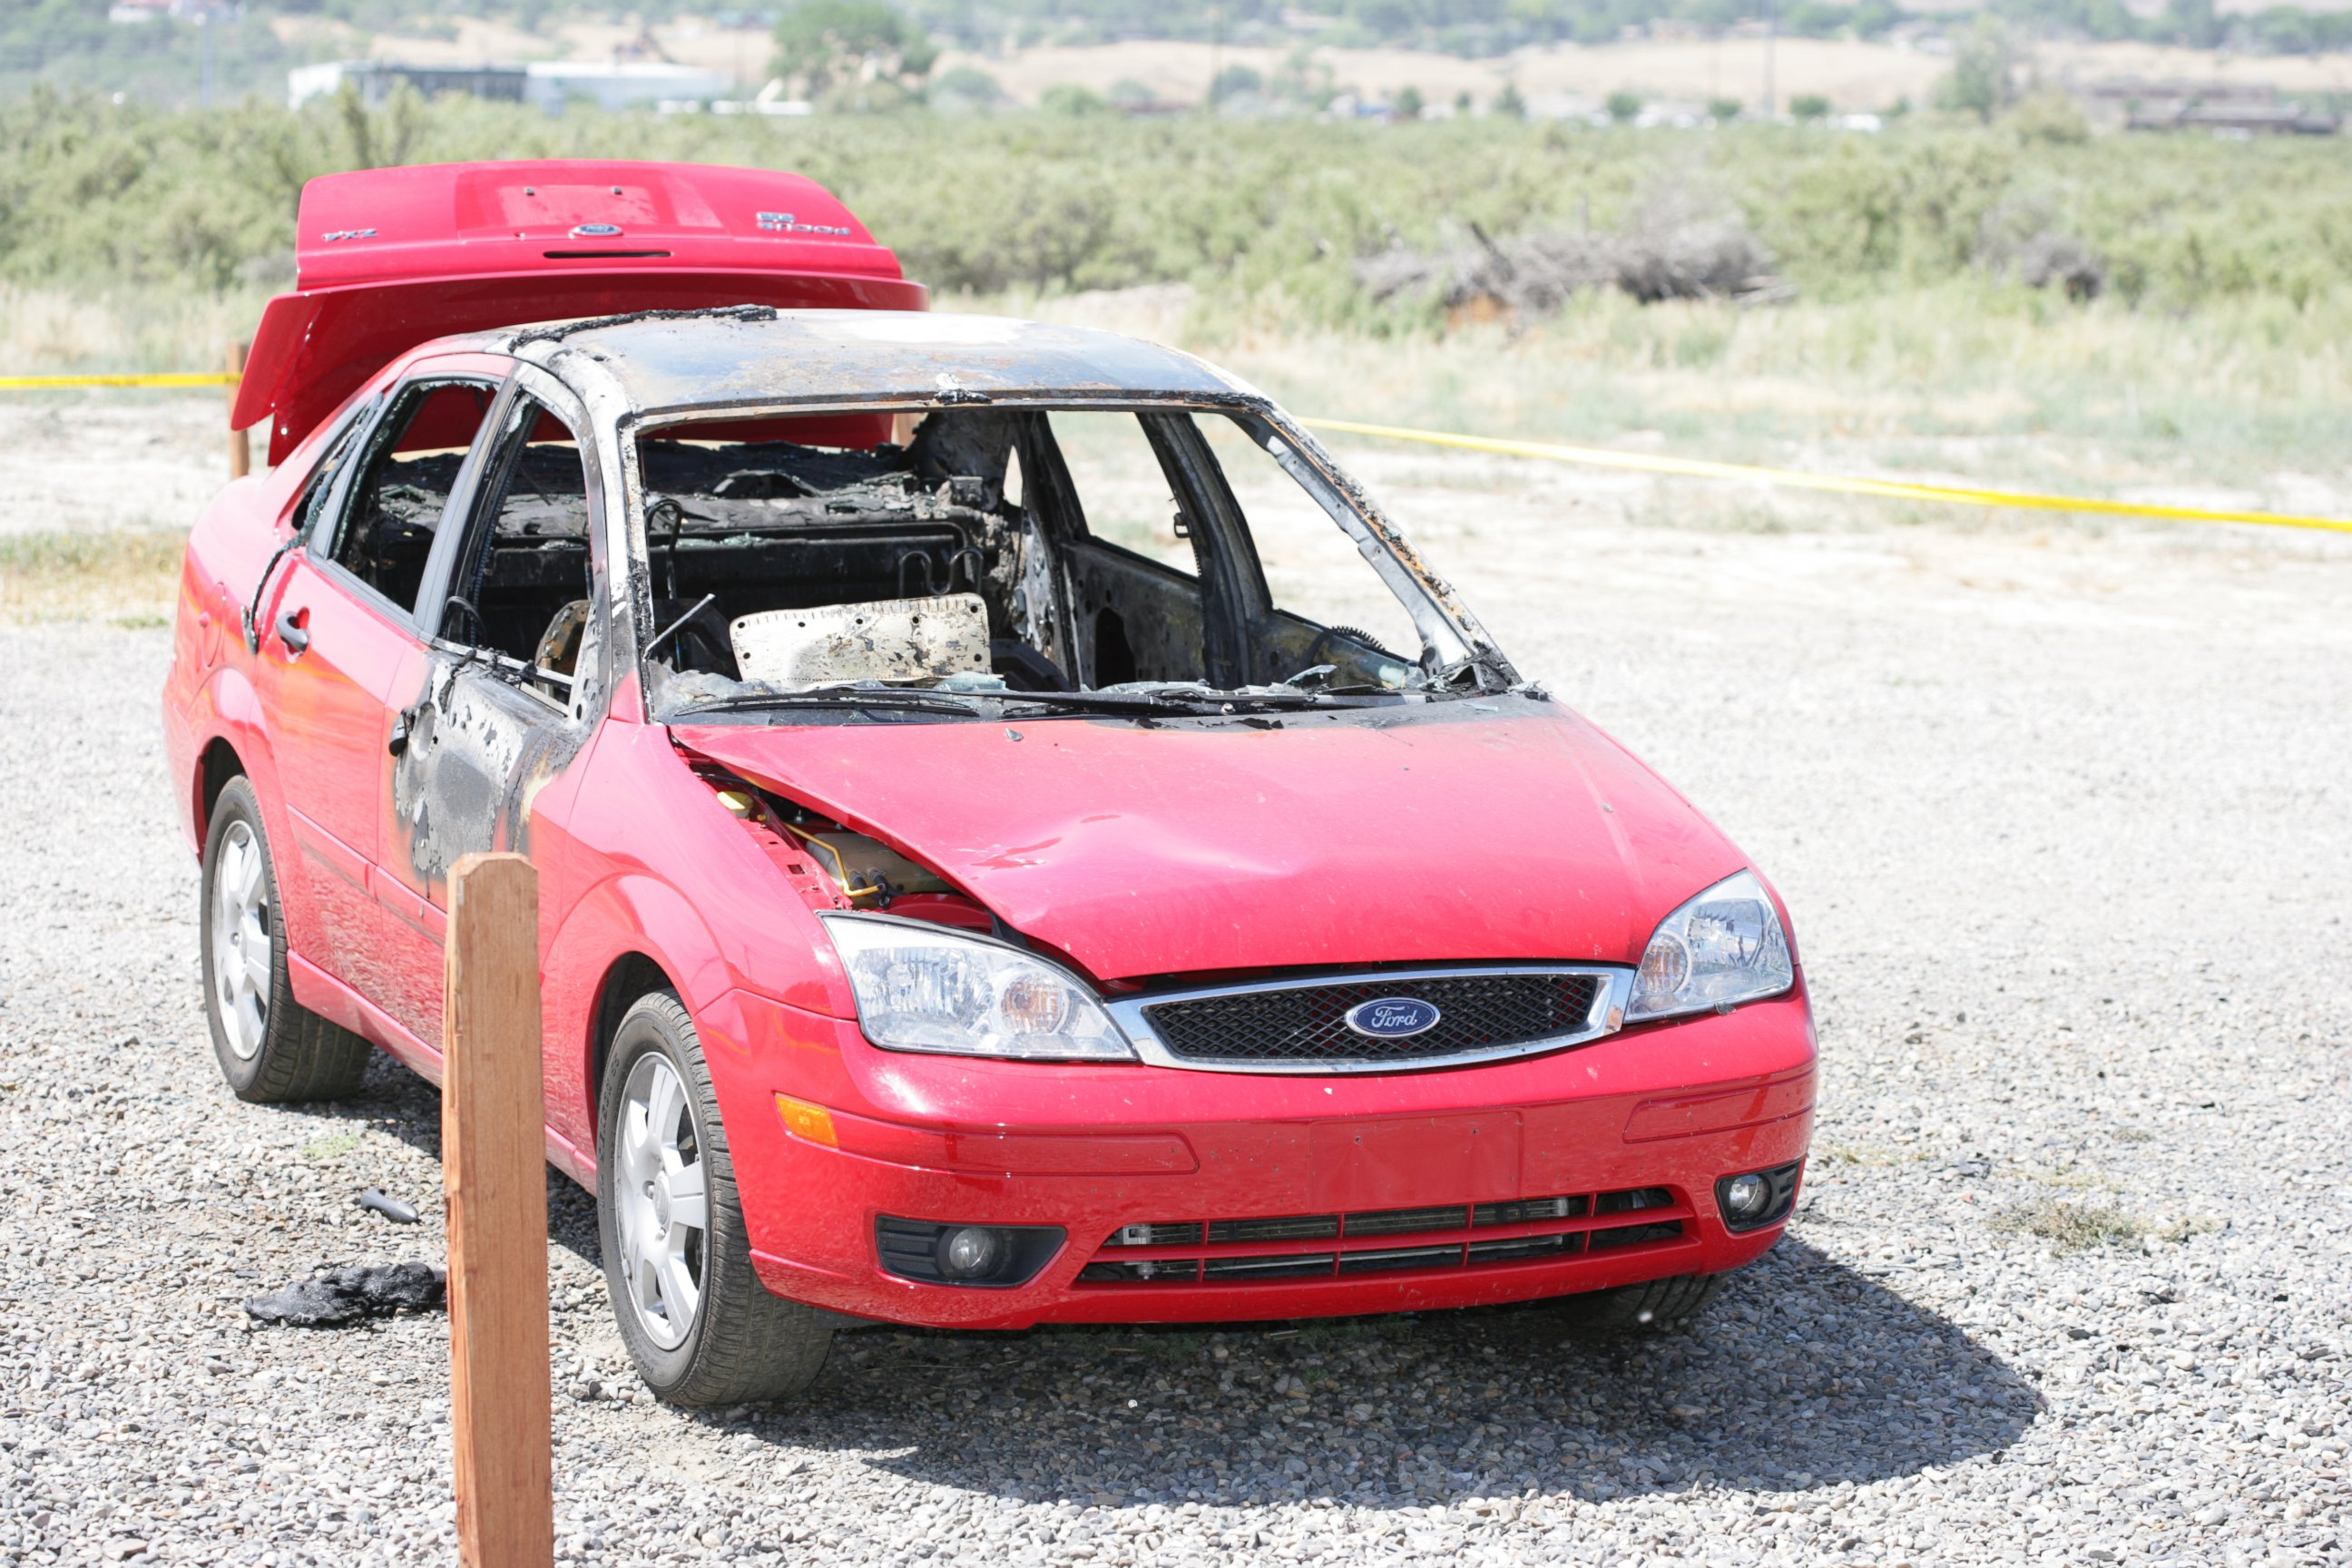 PHOTO: Paige Birgfeld's red Ford Focus, pictured here, was found on fire in a parking lot two miles from her Grand Junction, Colorado, home.